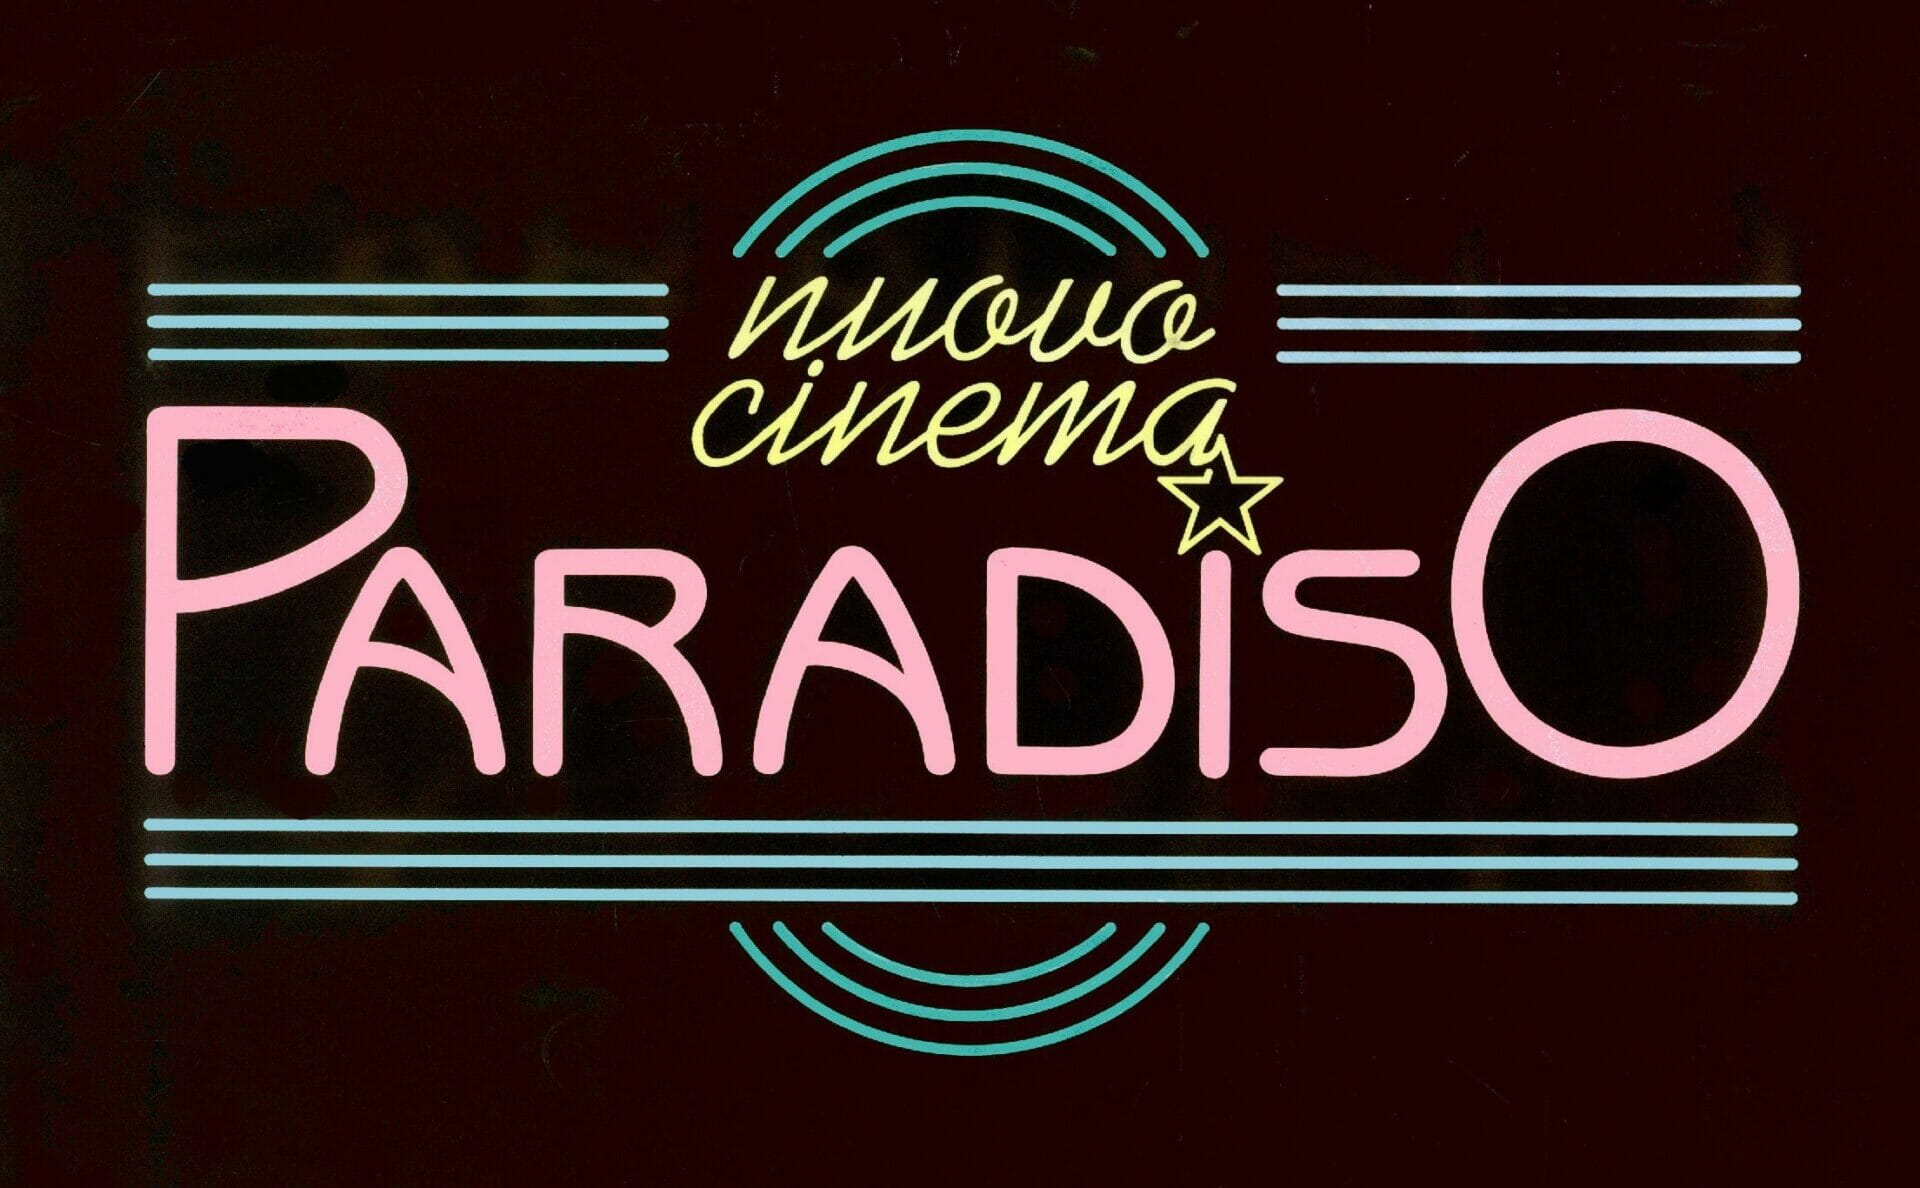 A Cinematic Ode to Passion: Nuovo Cinema Paradiso